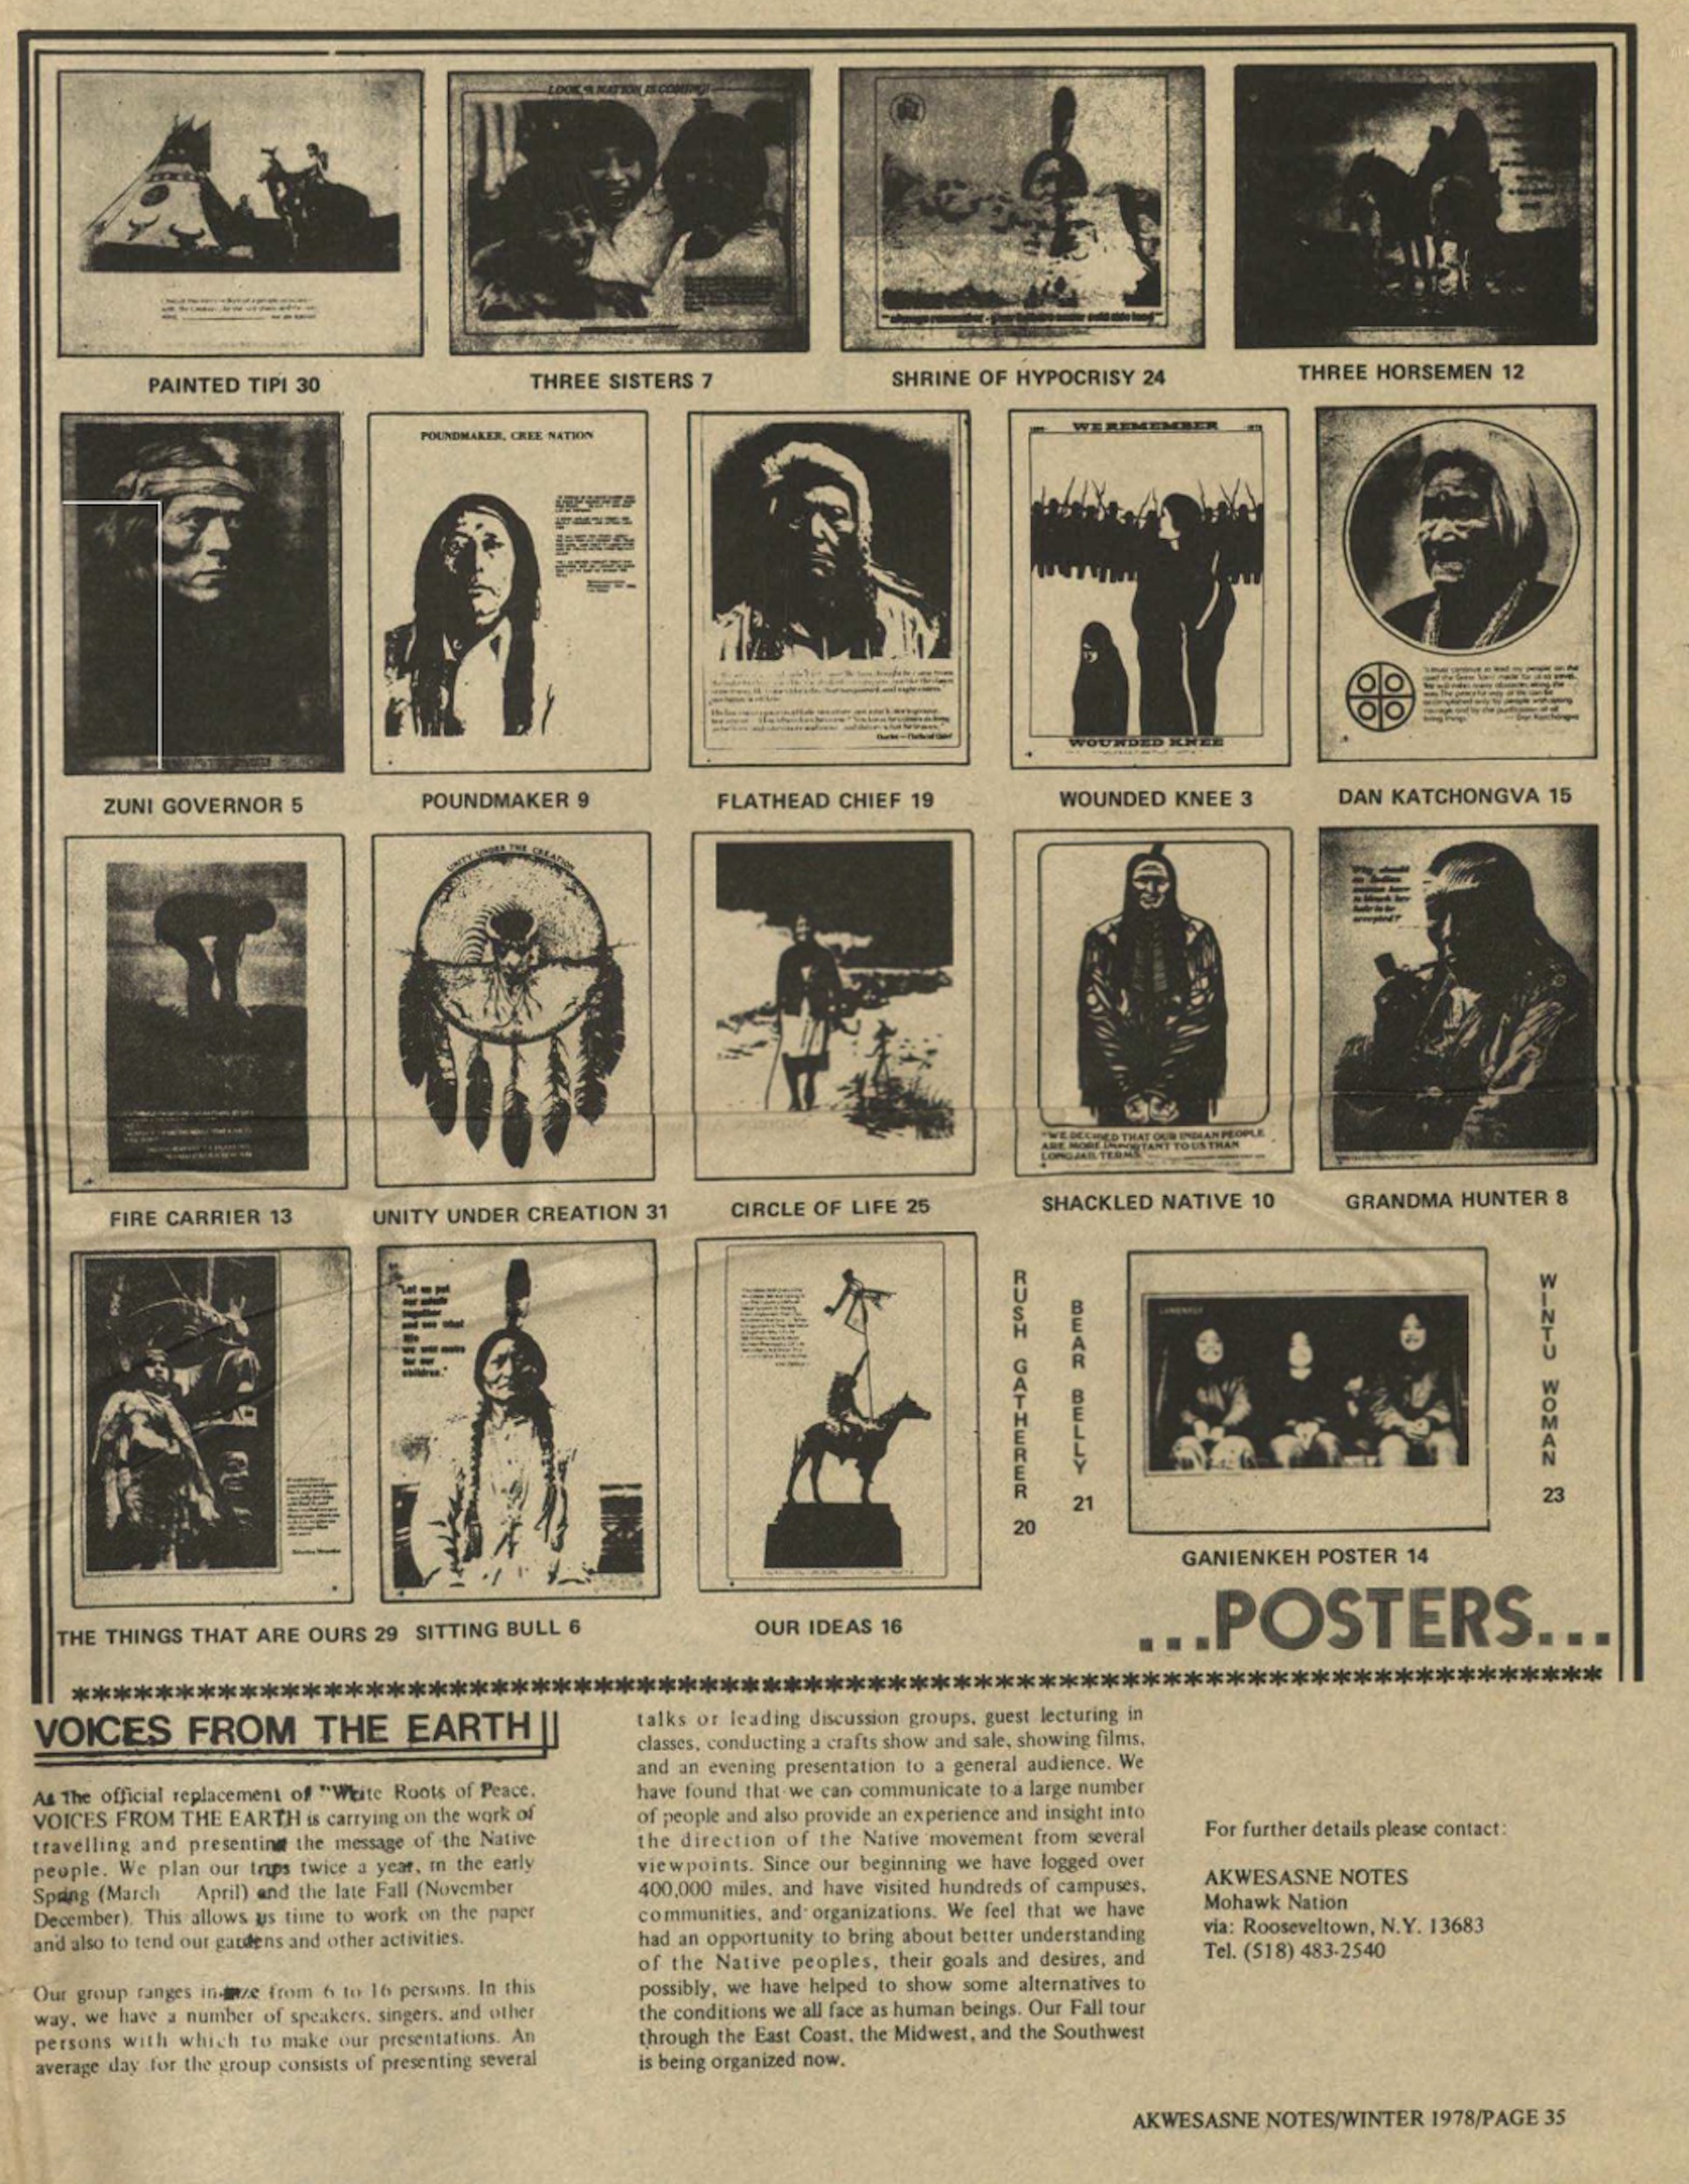 Full-page black-and-white print advertisement for a poster series "VOICES FROM THE EARTH," showing 18 differnt options